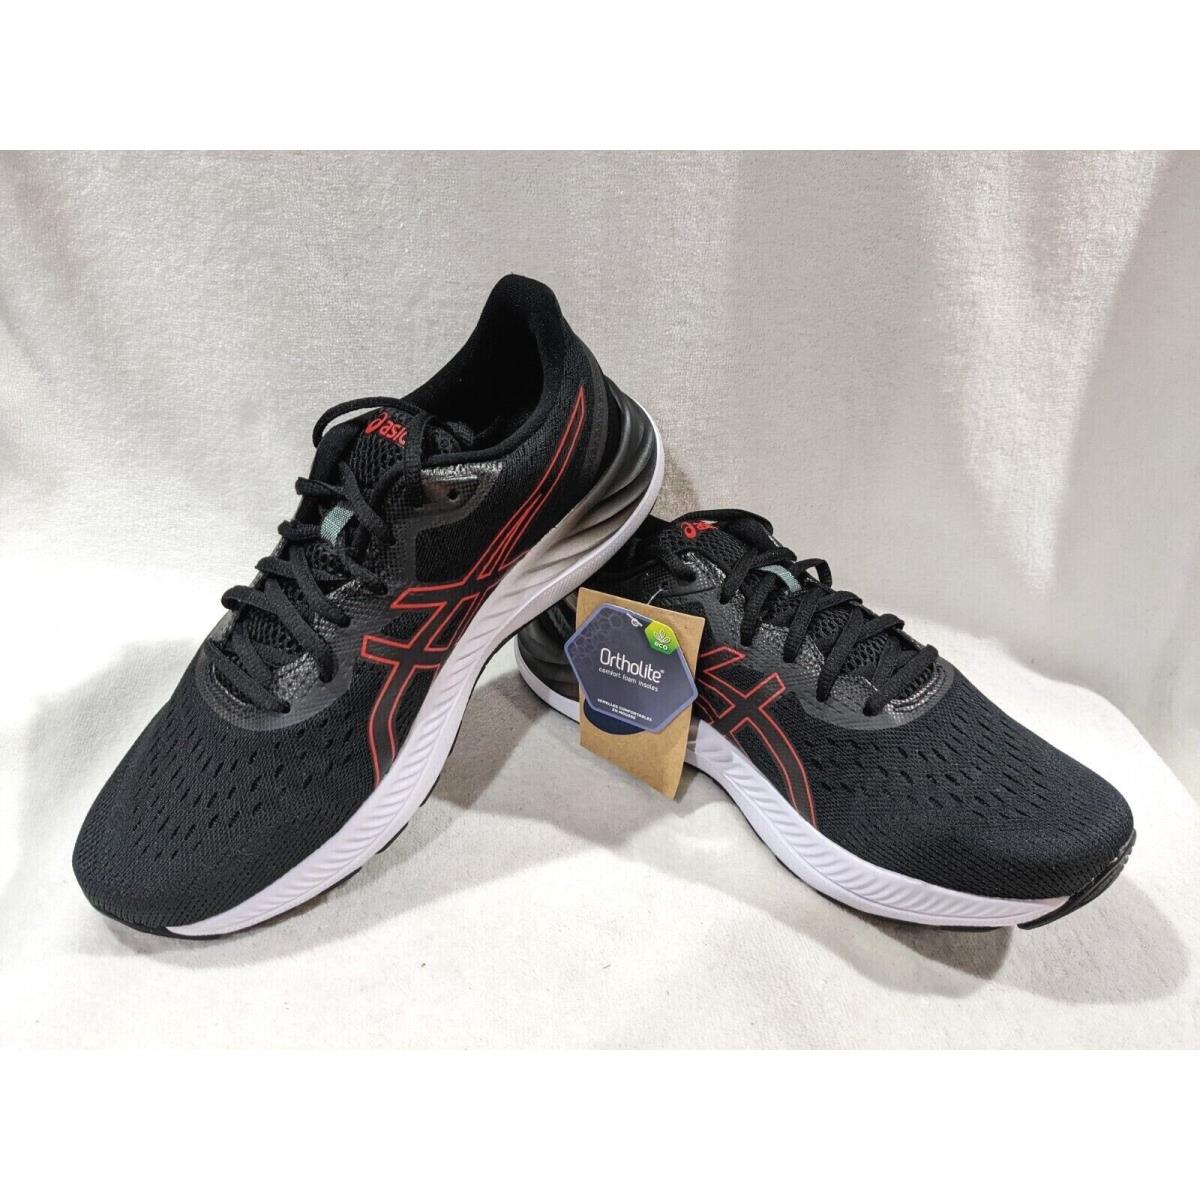 Asics Men`s Gel-excite 8 Black/red Running Shoes - Size 10.5/11/11.5 X-wide